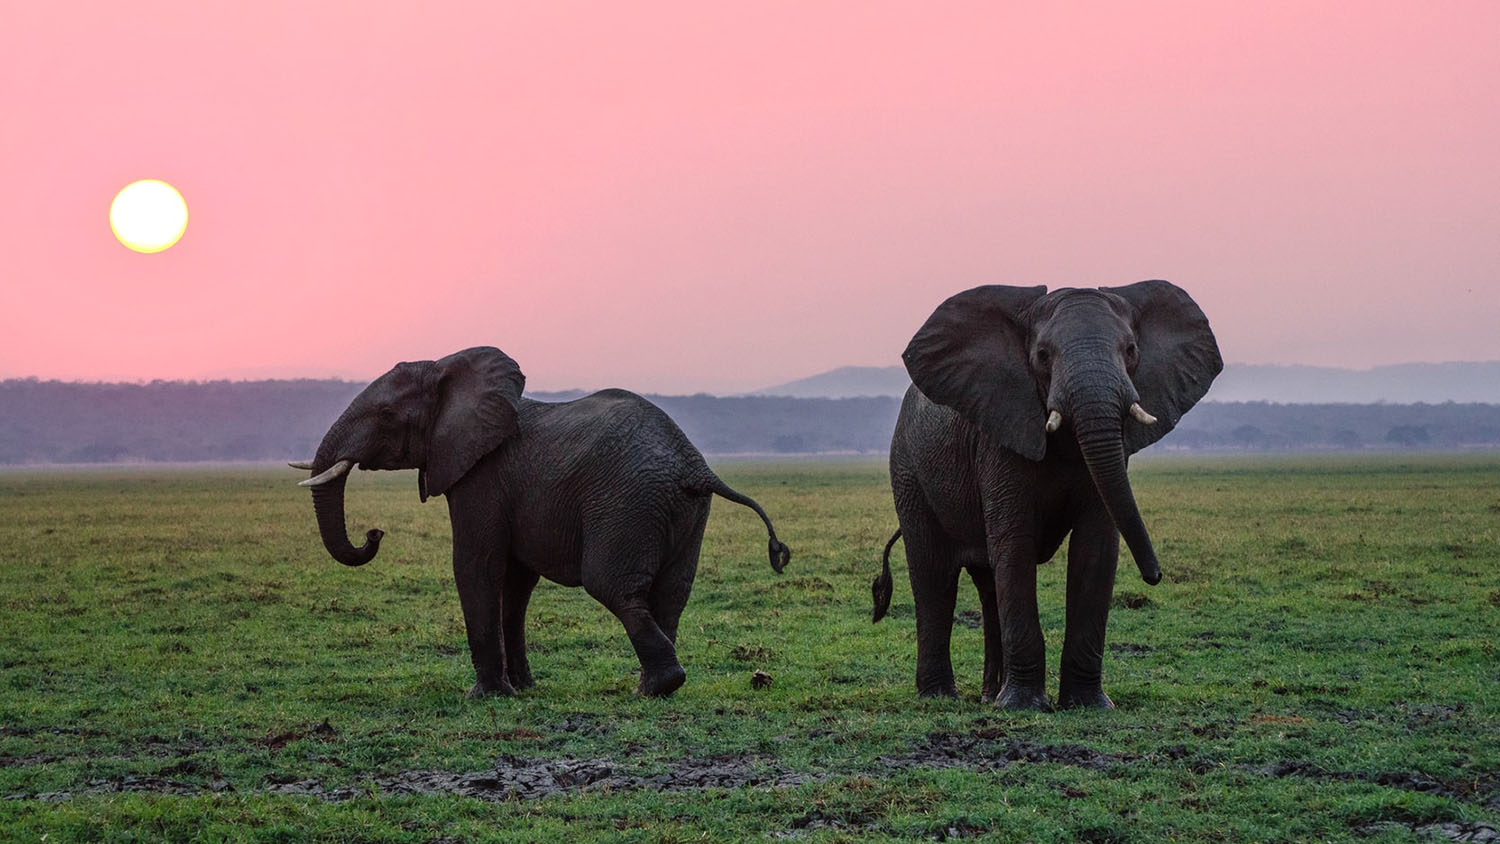 two elephants silhouetted against the sunrise